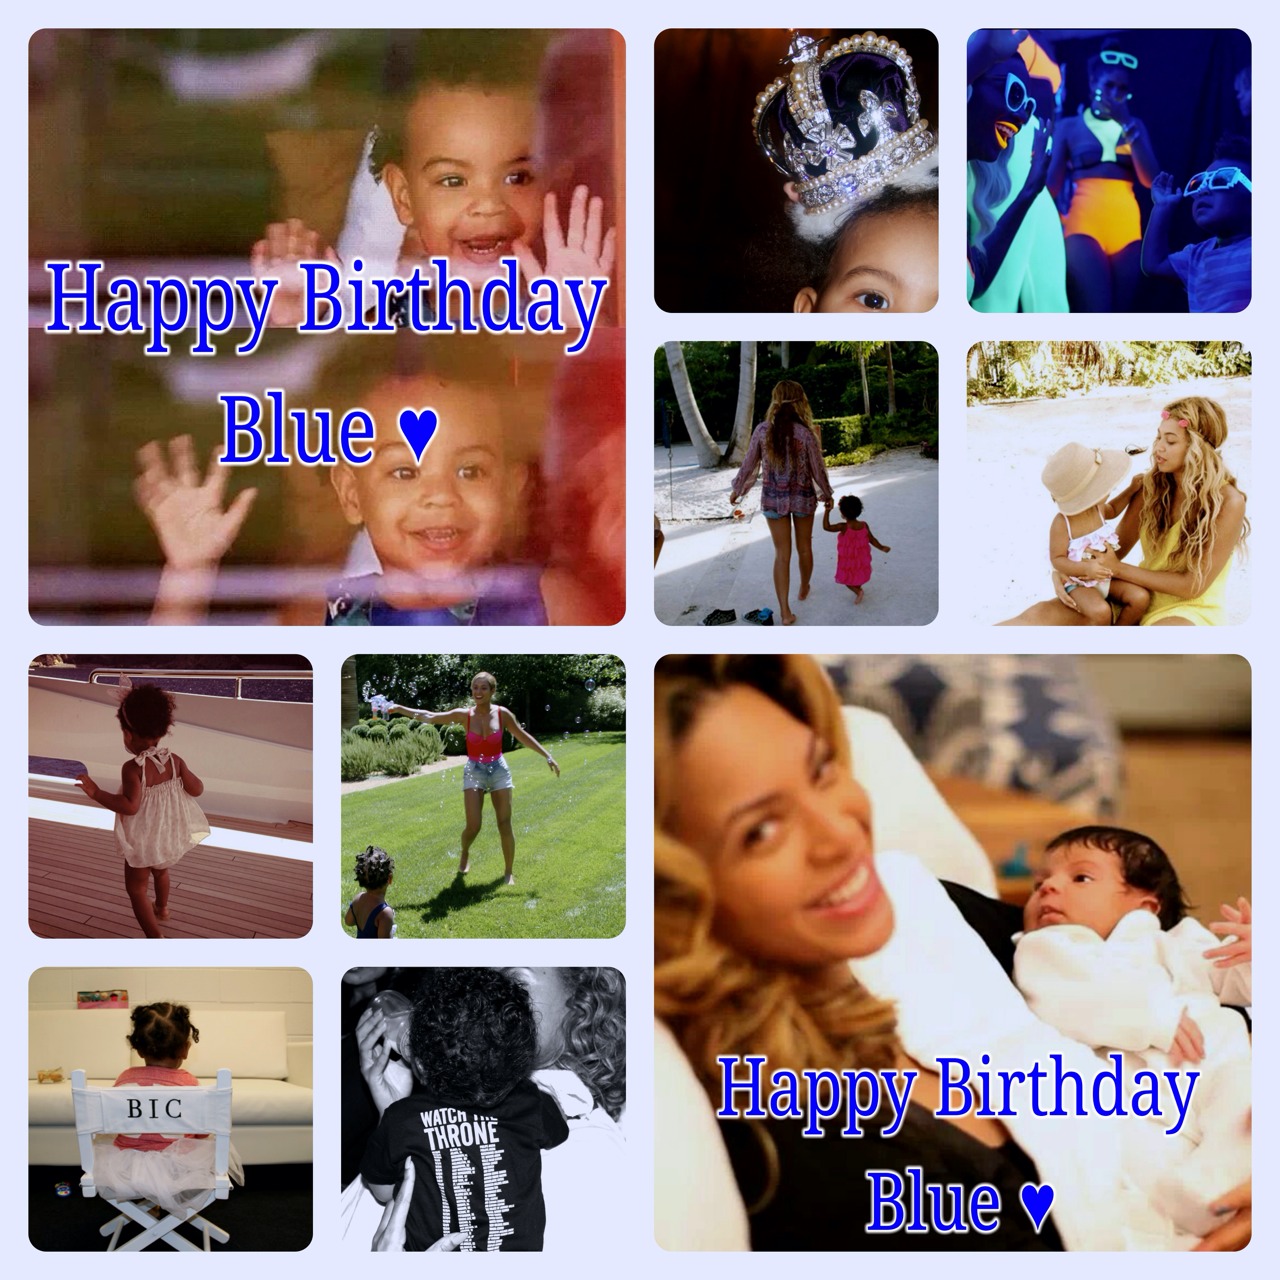 Beyoncé Commemorates Blue Ivy's 2nd Birthday with Fan Tumblr Blog